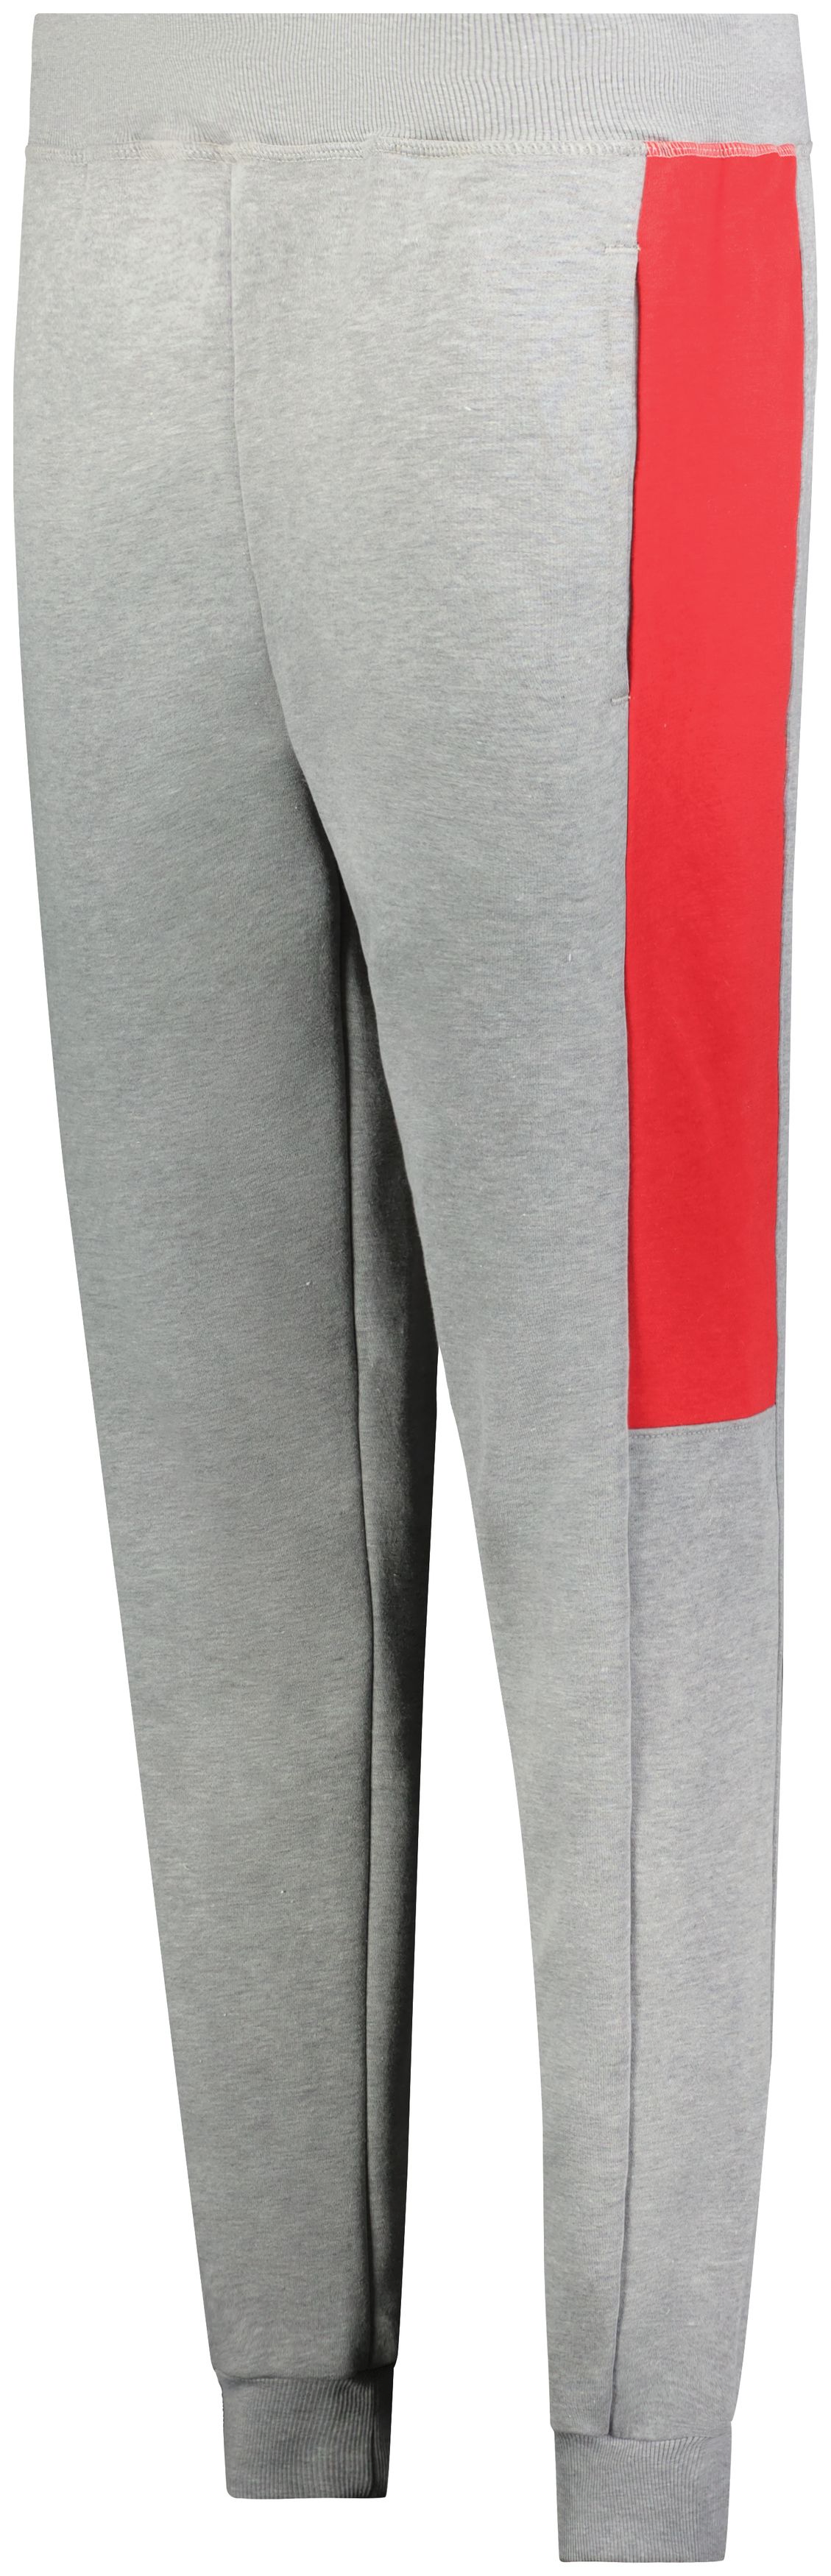 click to view Grey Heather/Scarlet